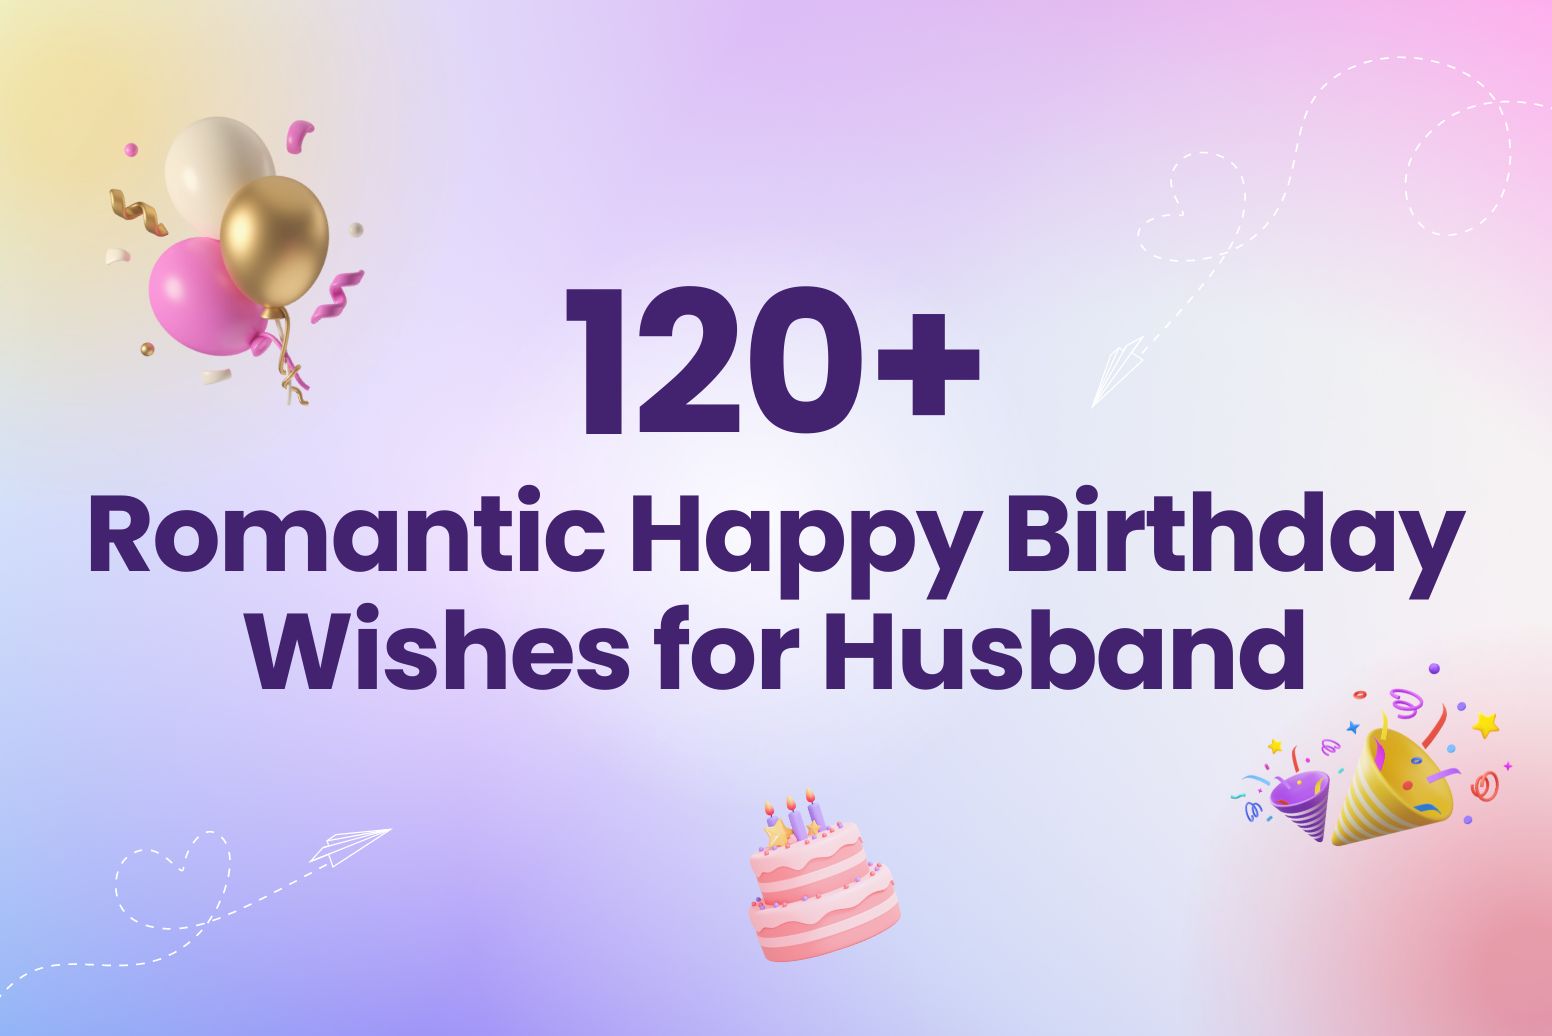 120+ Romantic Happy Birthday Wishes for Husband